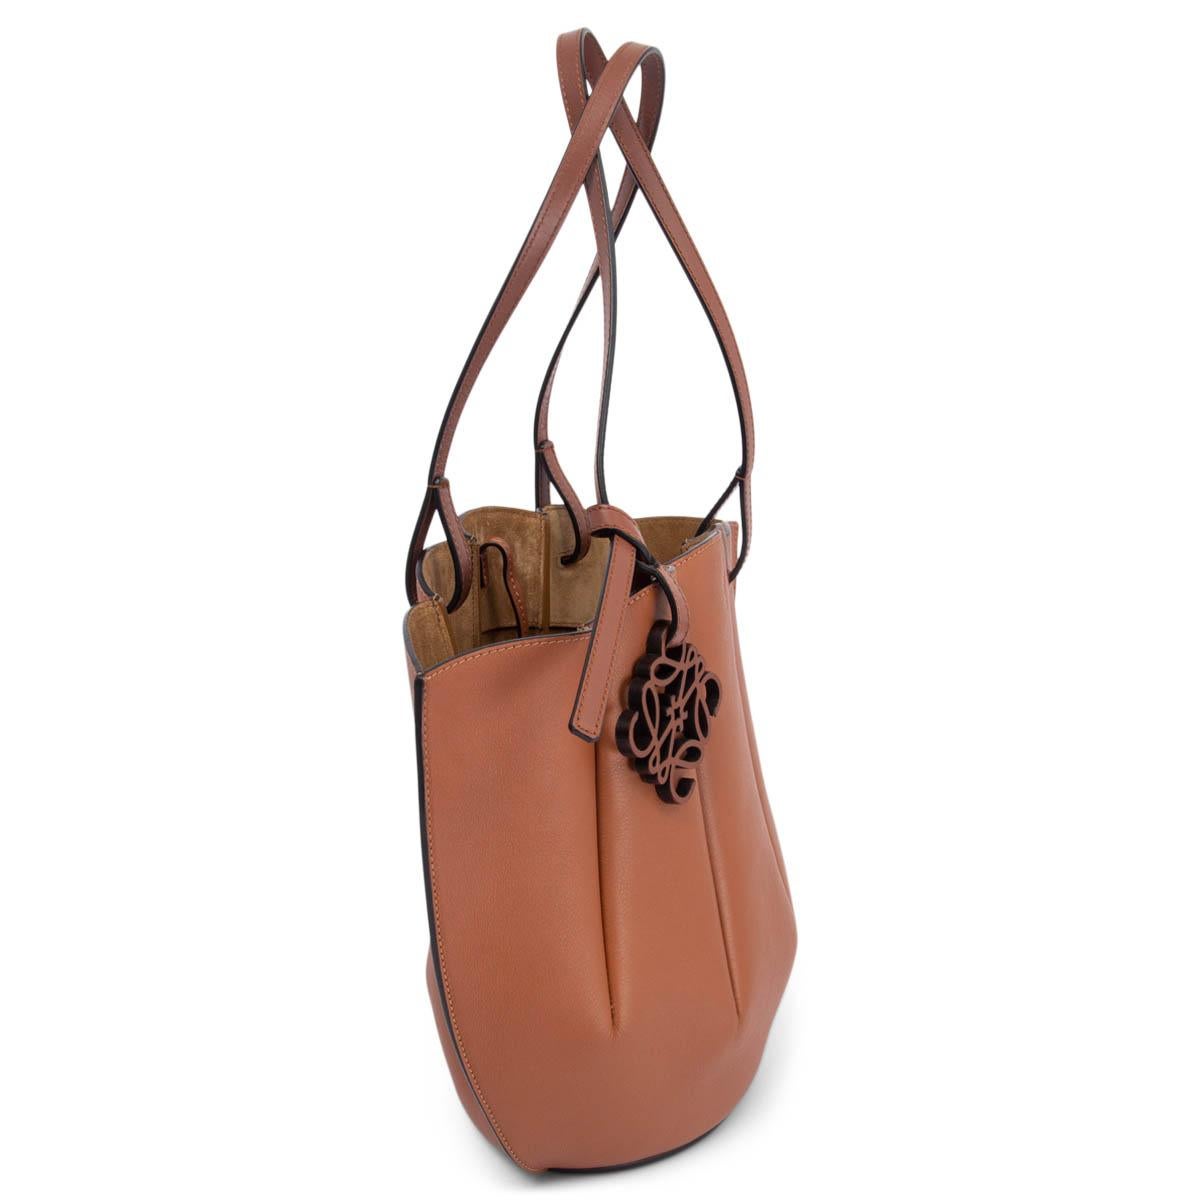 100% authentic Loewe Small Shell tote bag in tan smooth calfskin. Unlined featuring flat top handles with tonal stitching, open top and anagram charm. Has been carried and is in excellent condition. 

Measurements
Height	27cm (10.5in)
Width	38cm